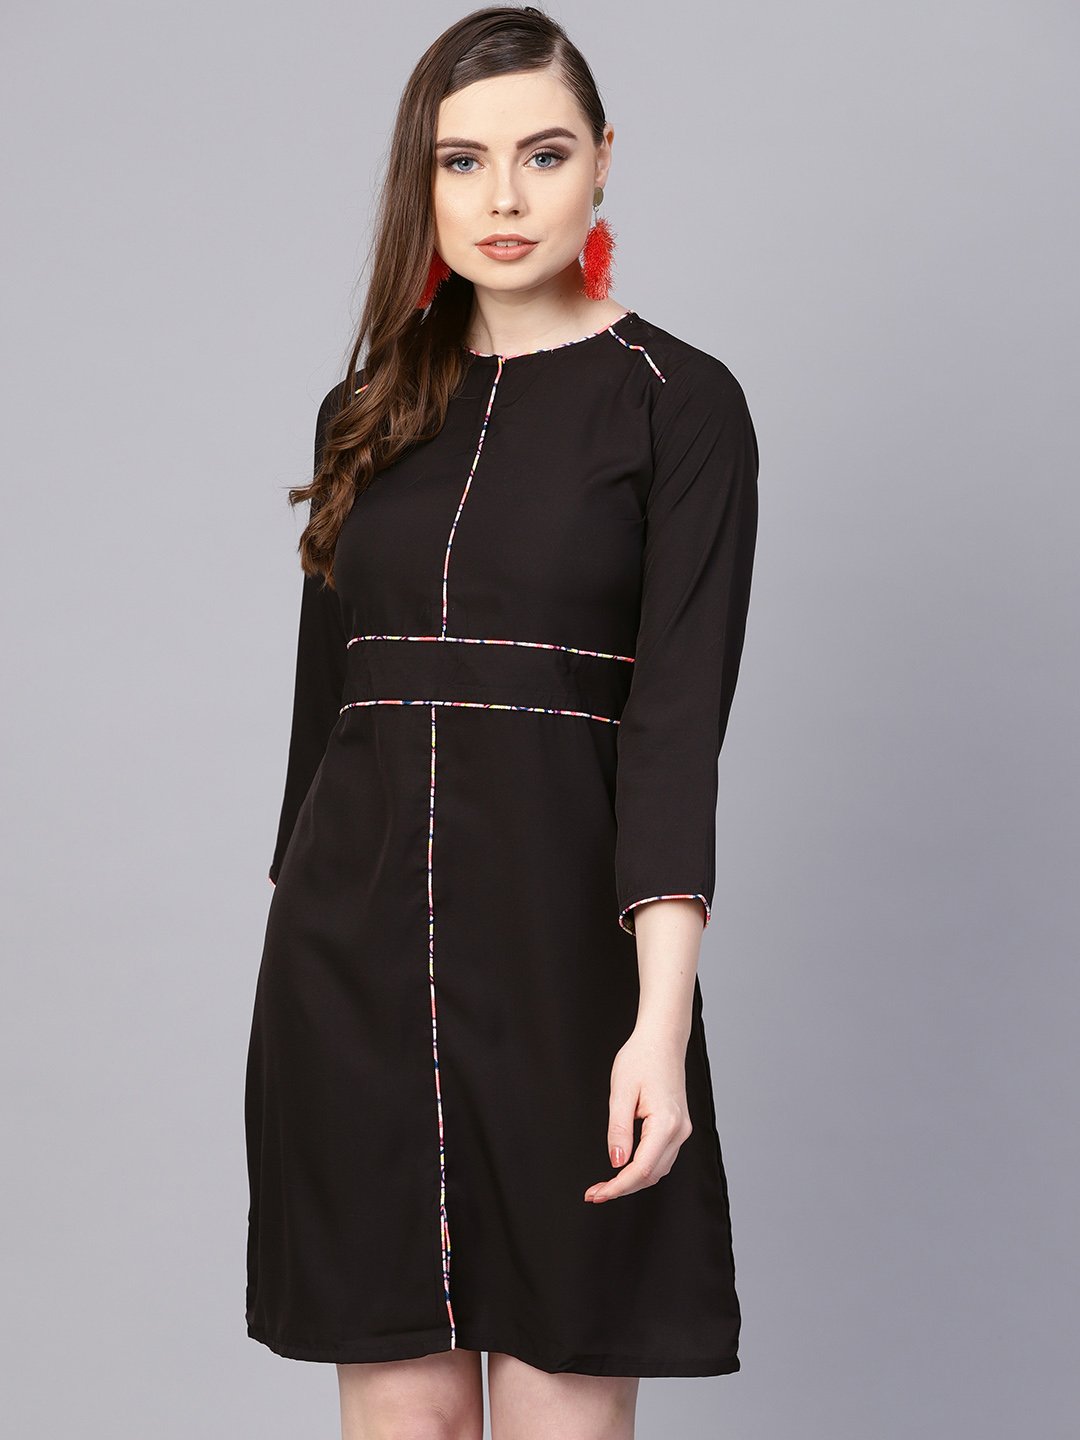 Women's Solid Black Dress With Printed Piping & Round Neck - Nayo Clothing